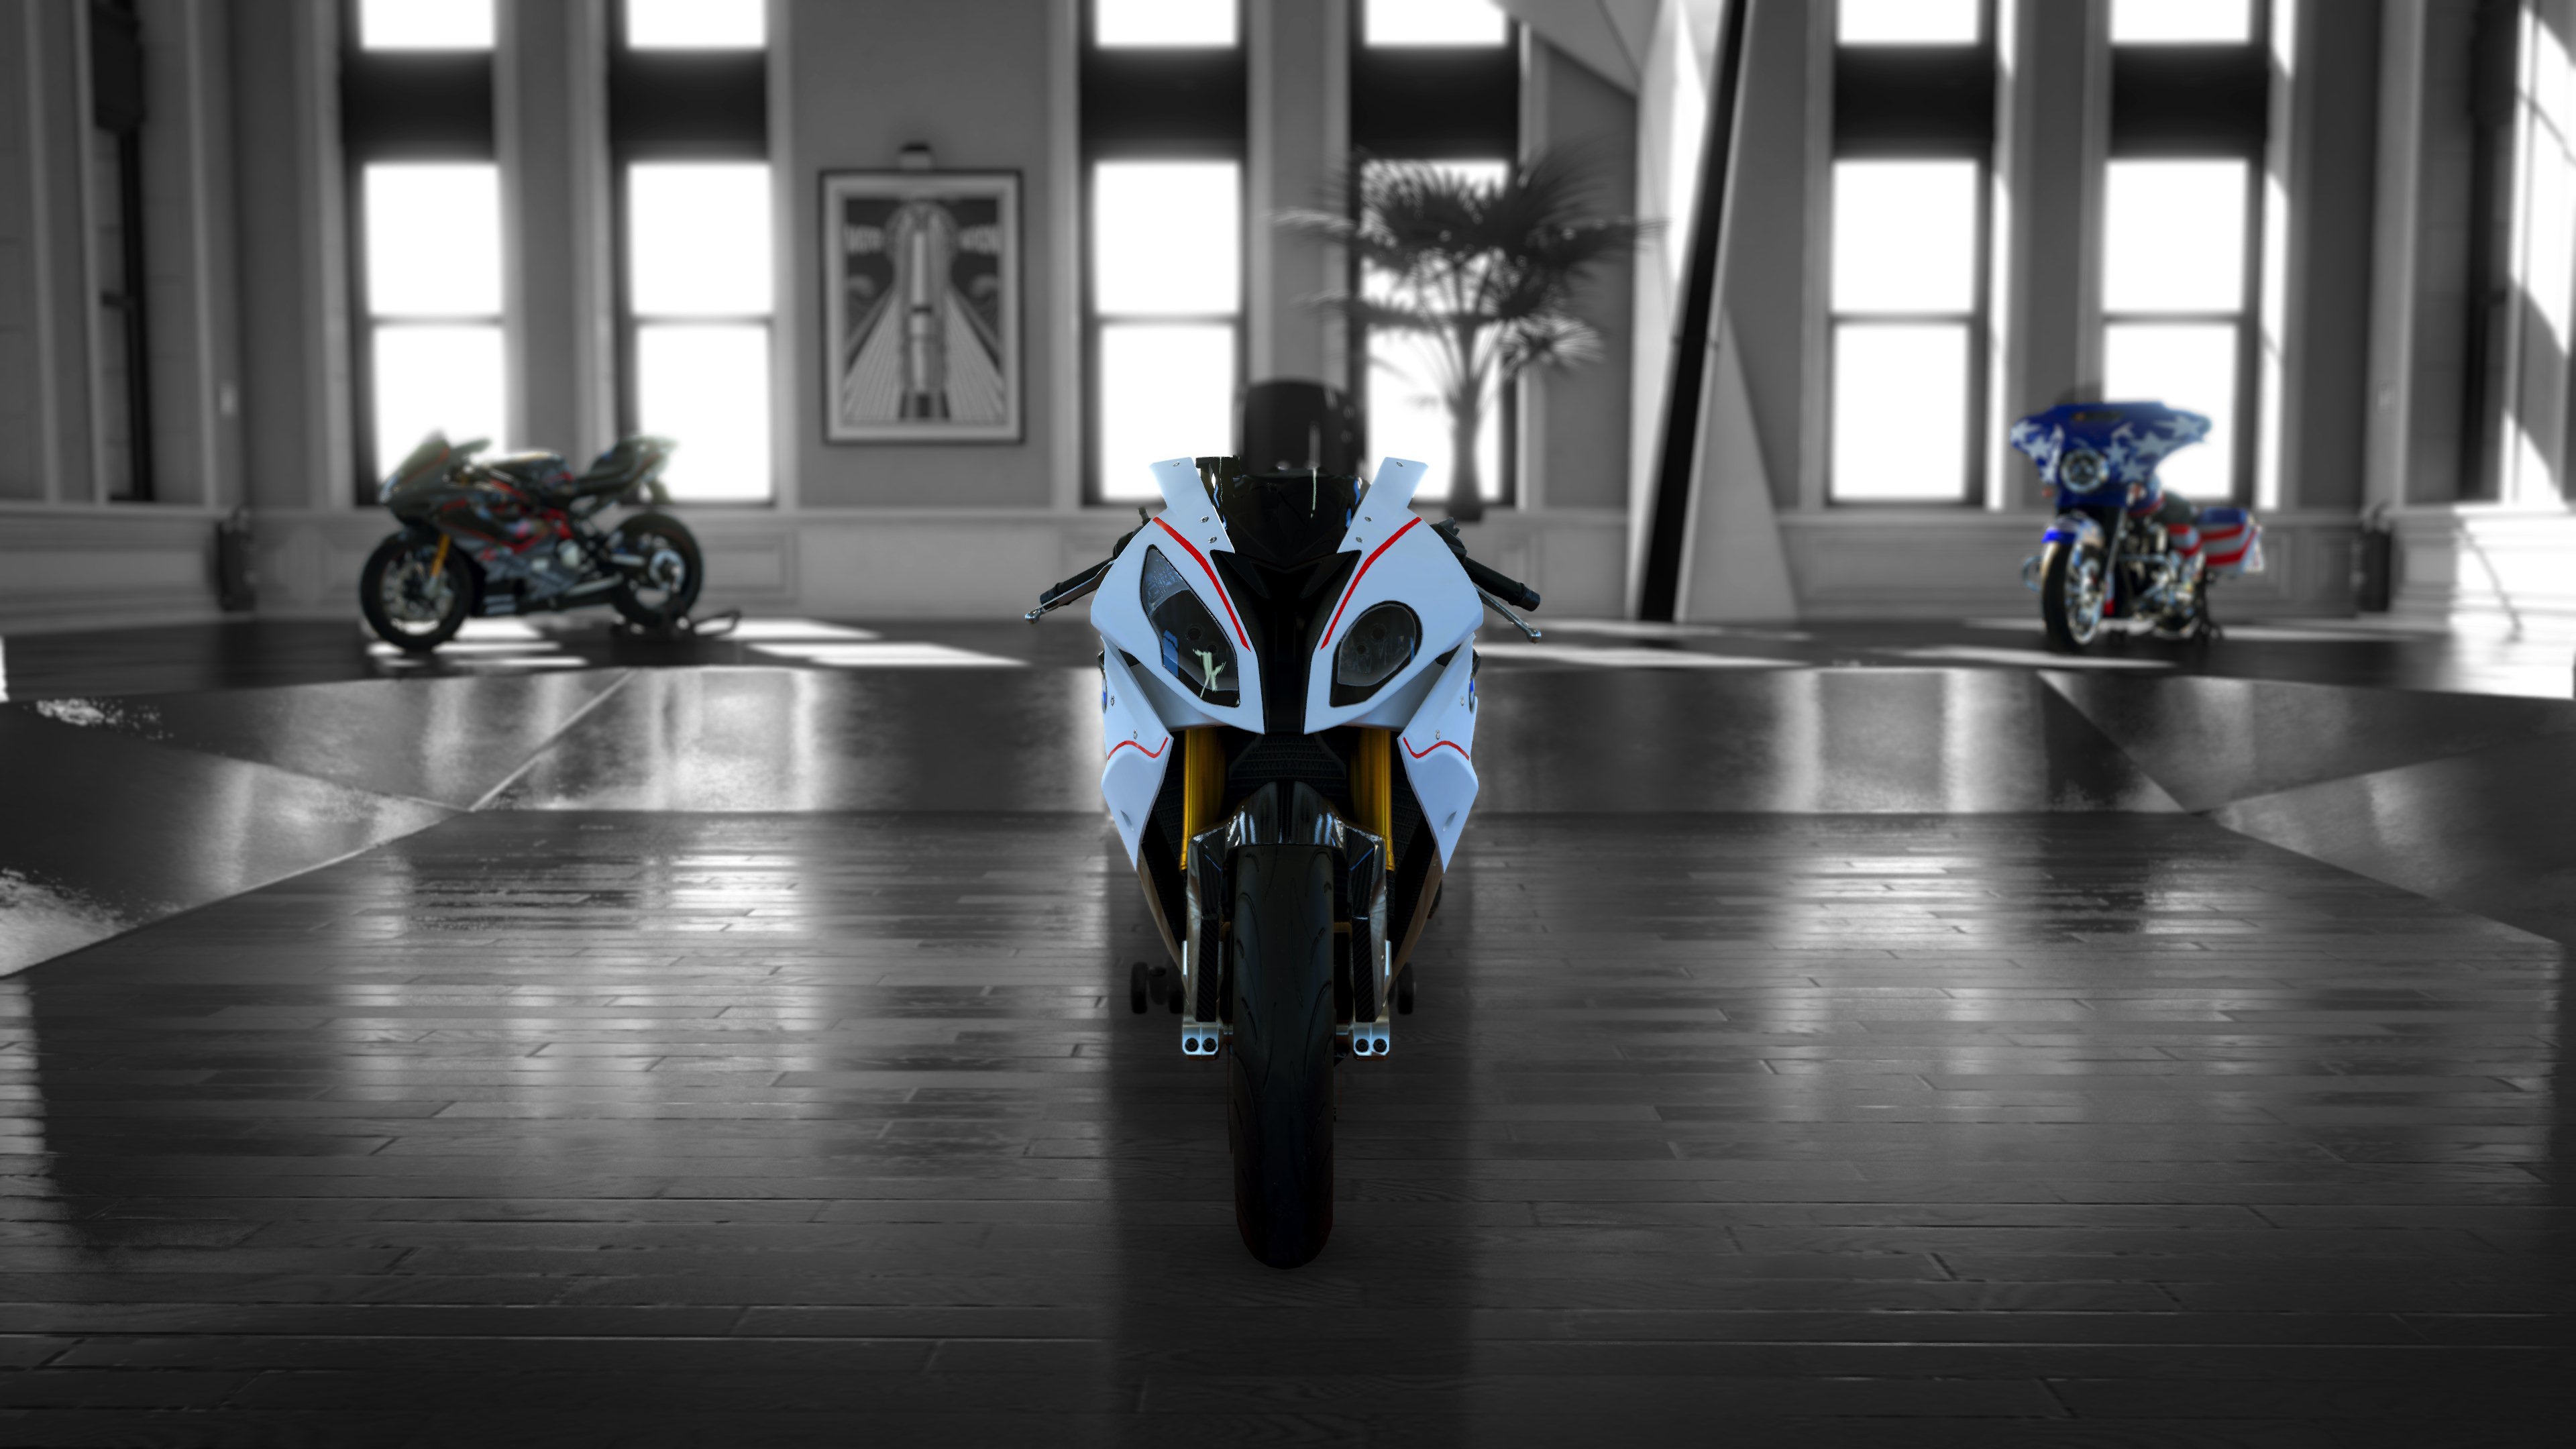 bmw s1000rr, bmw s1000, vehicles, motorcycle, motorcycles